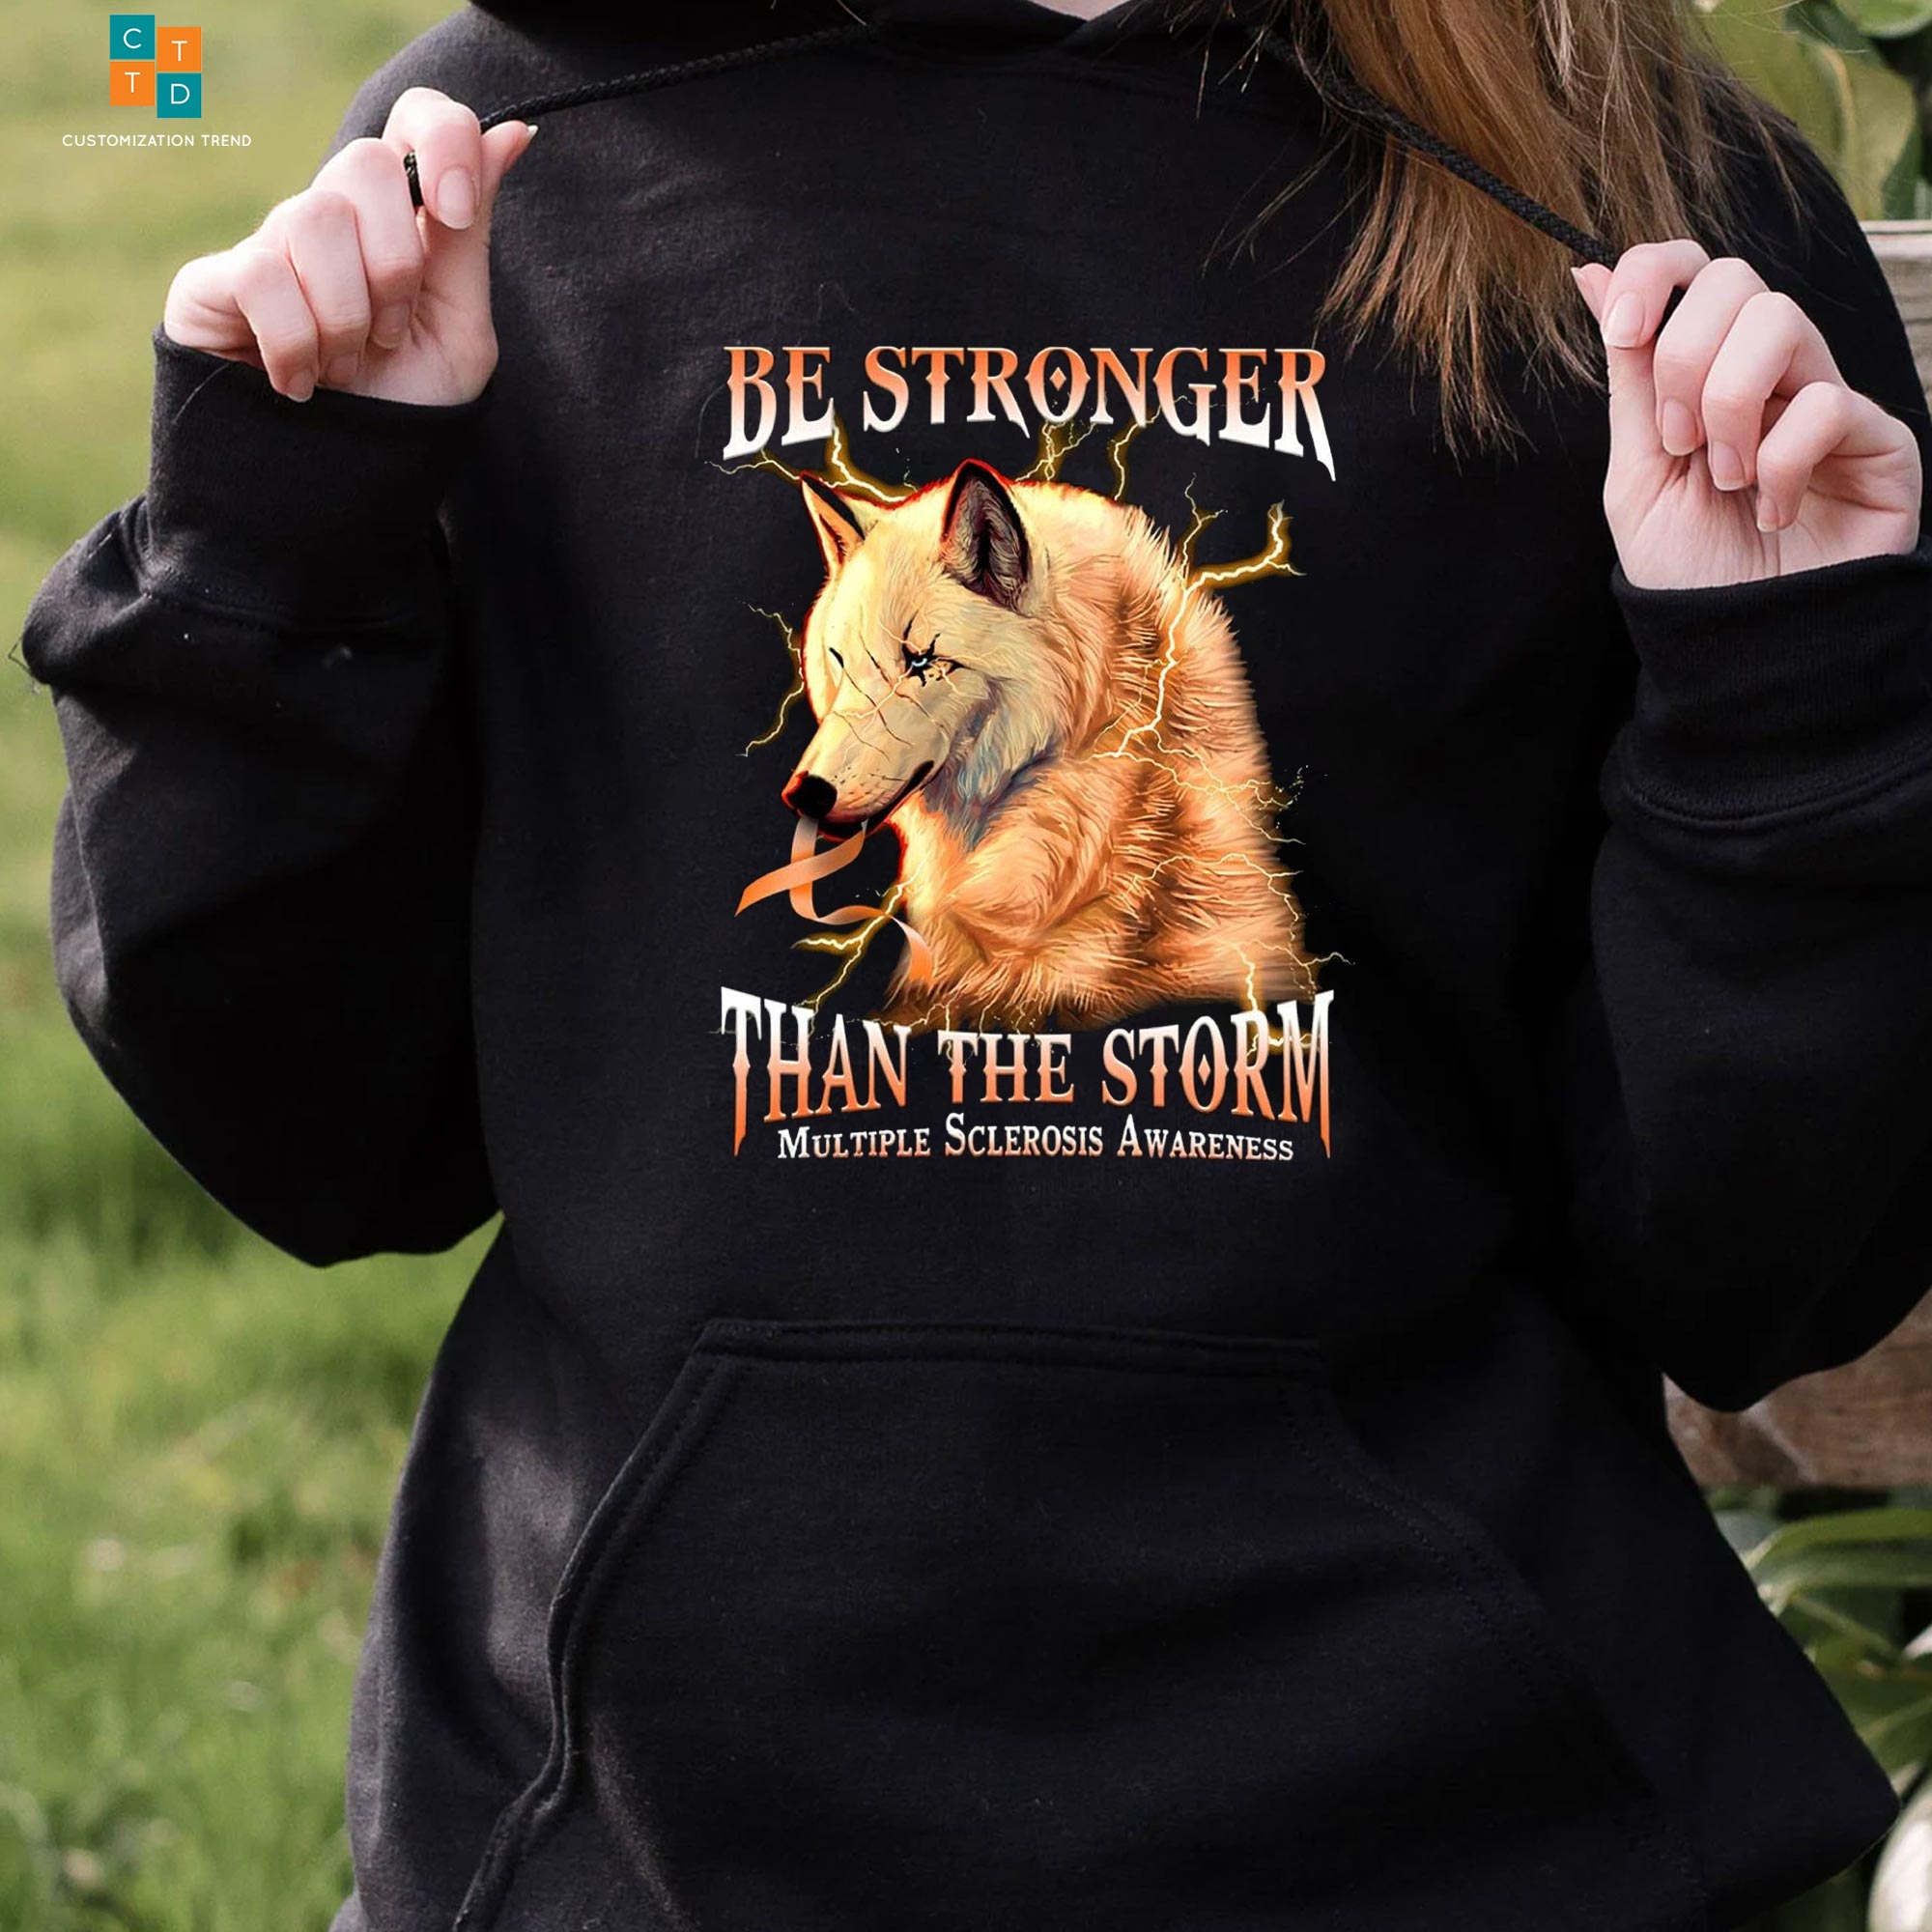 Be Stronger Than The Storm Multiple Sclerosis Awareness Hoodie, Shirt